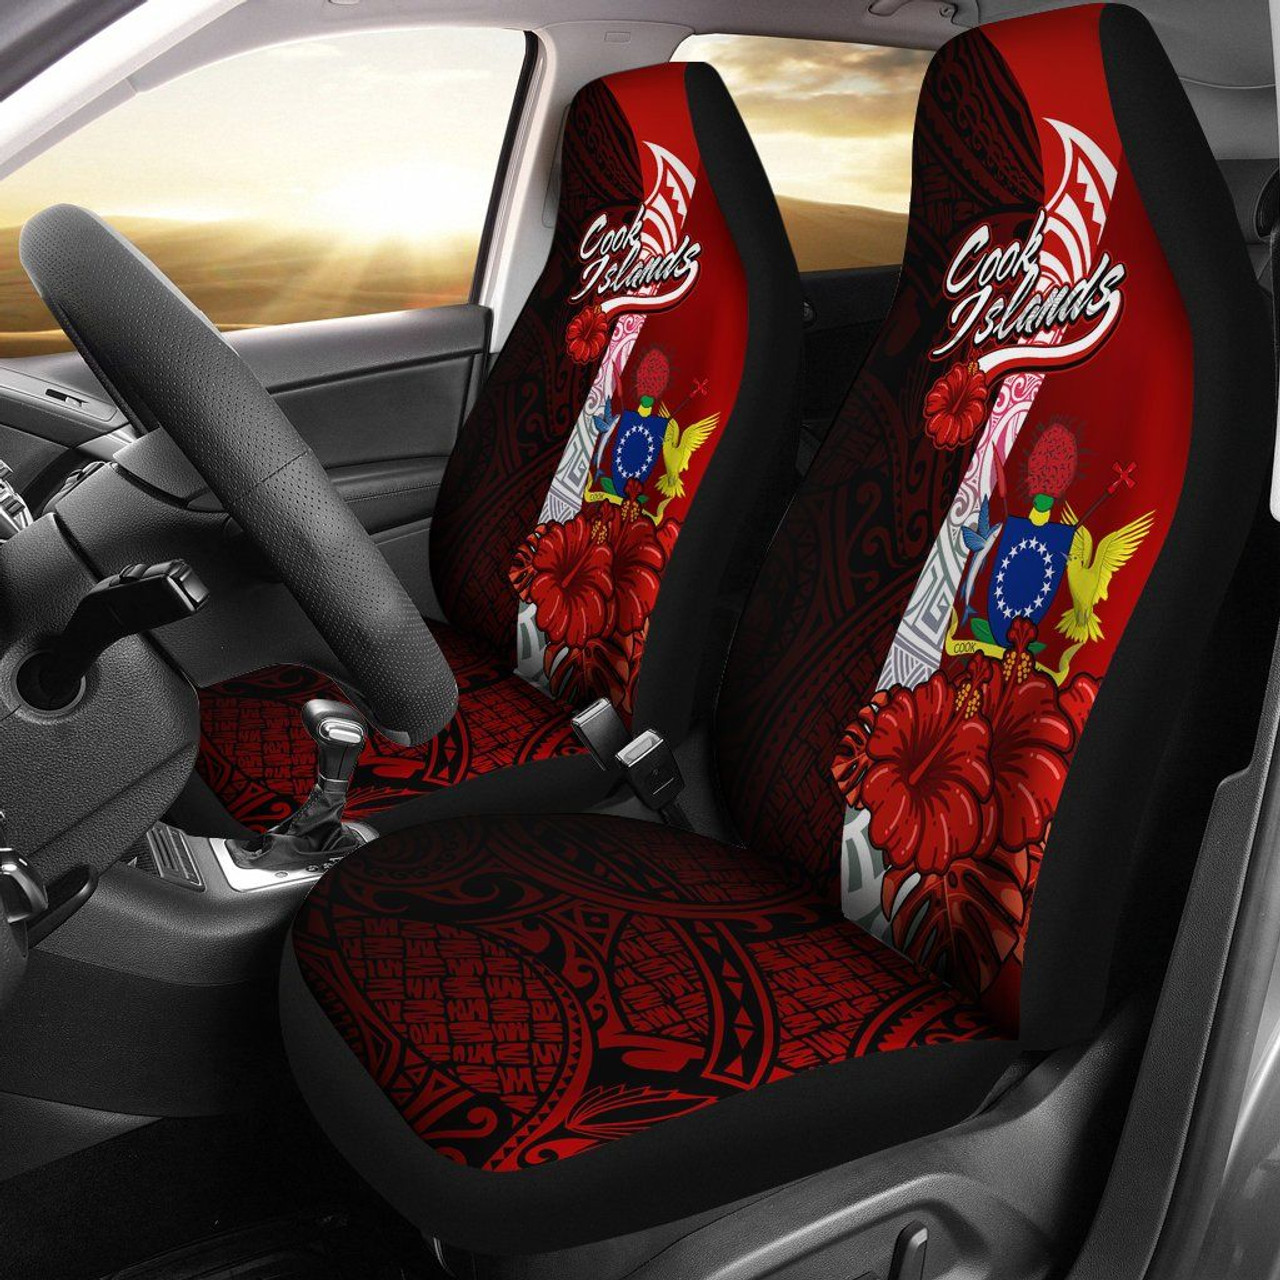 Cook Islands Polynesian Car Seat Covers - Coat Of Arm With Hibiscus